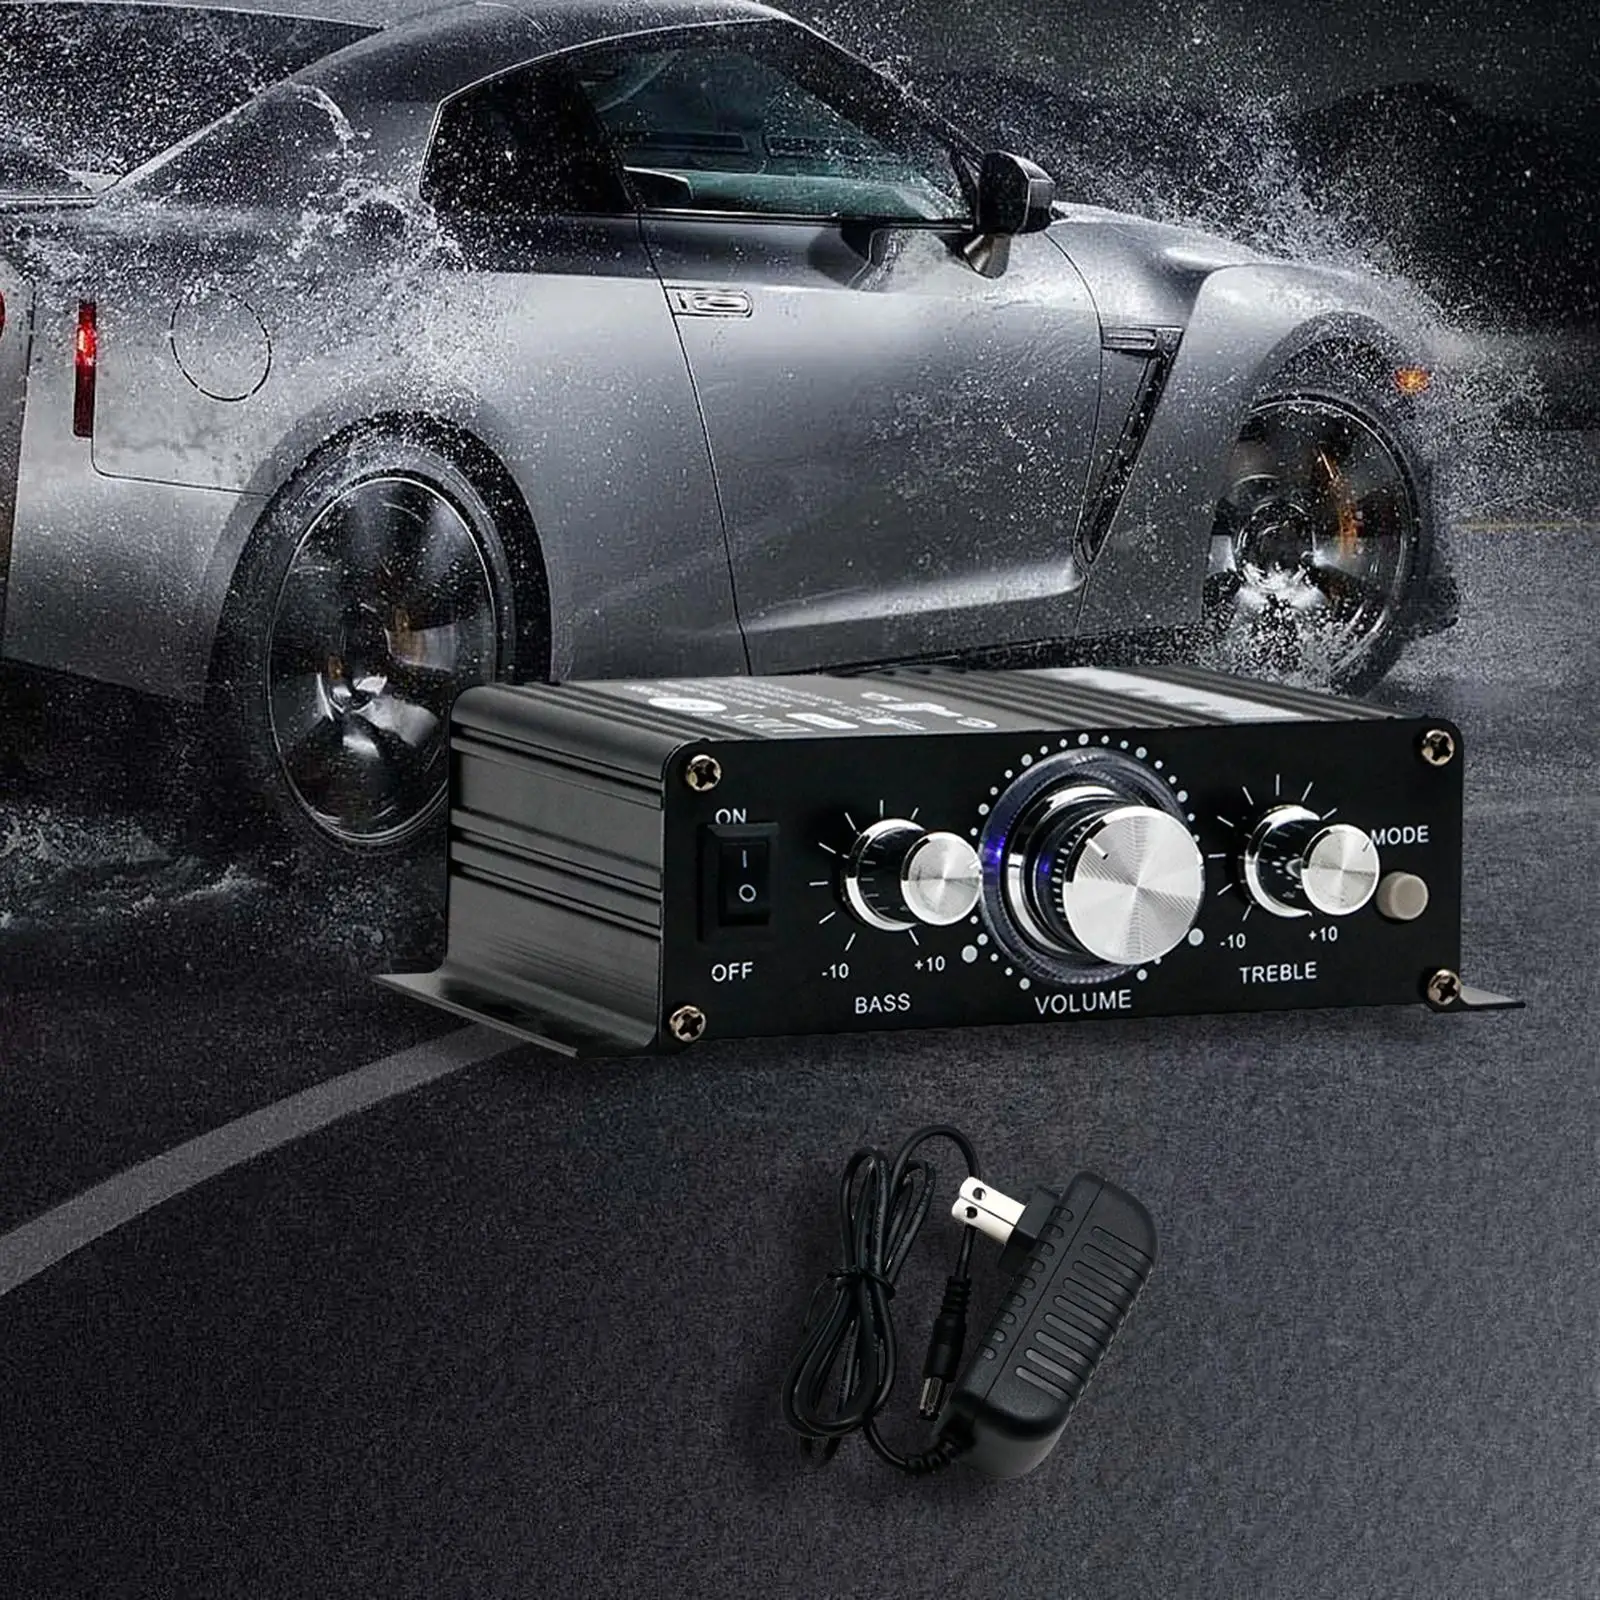 Bluetooth Power Amplifier Professional HiFi Sound for Home Theater Car Party